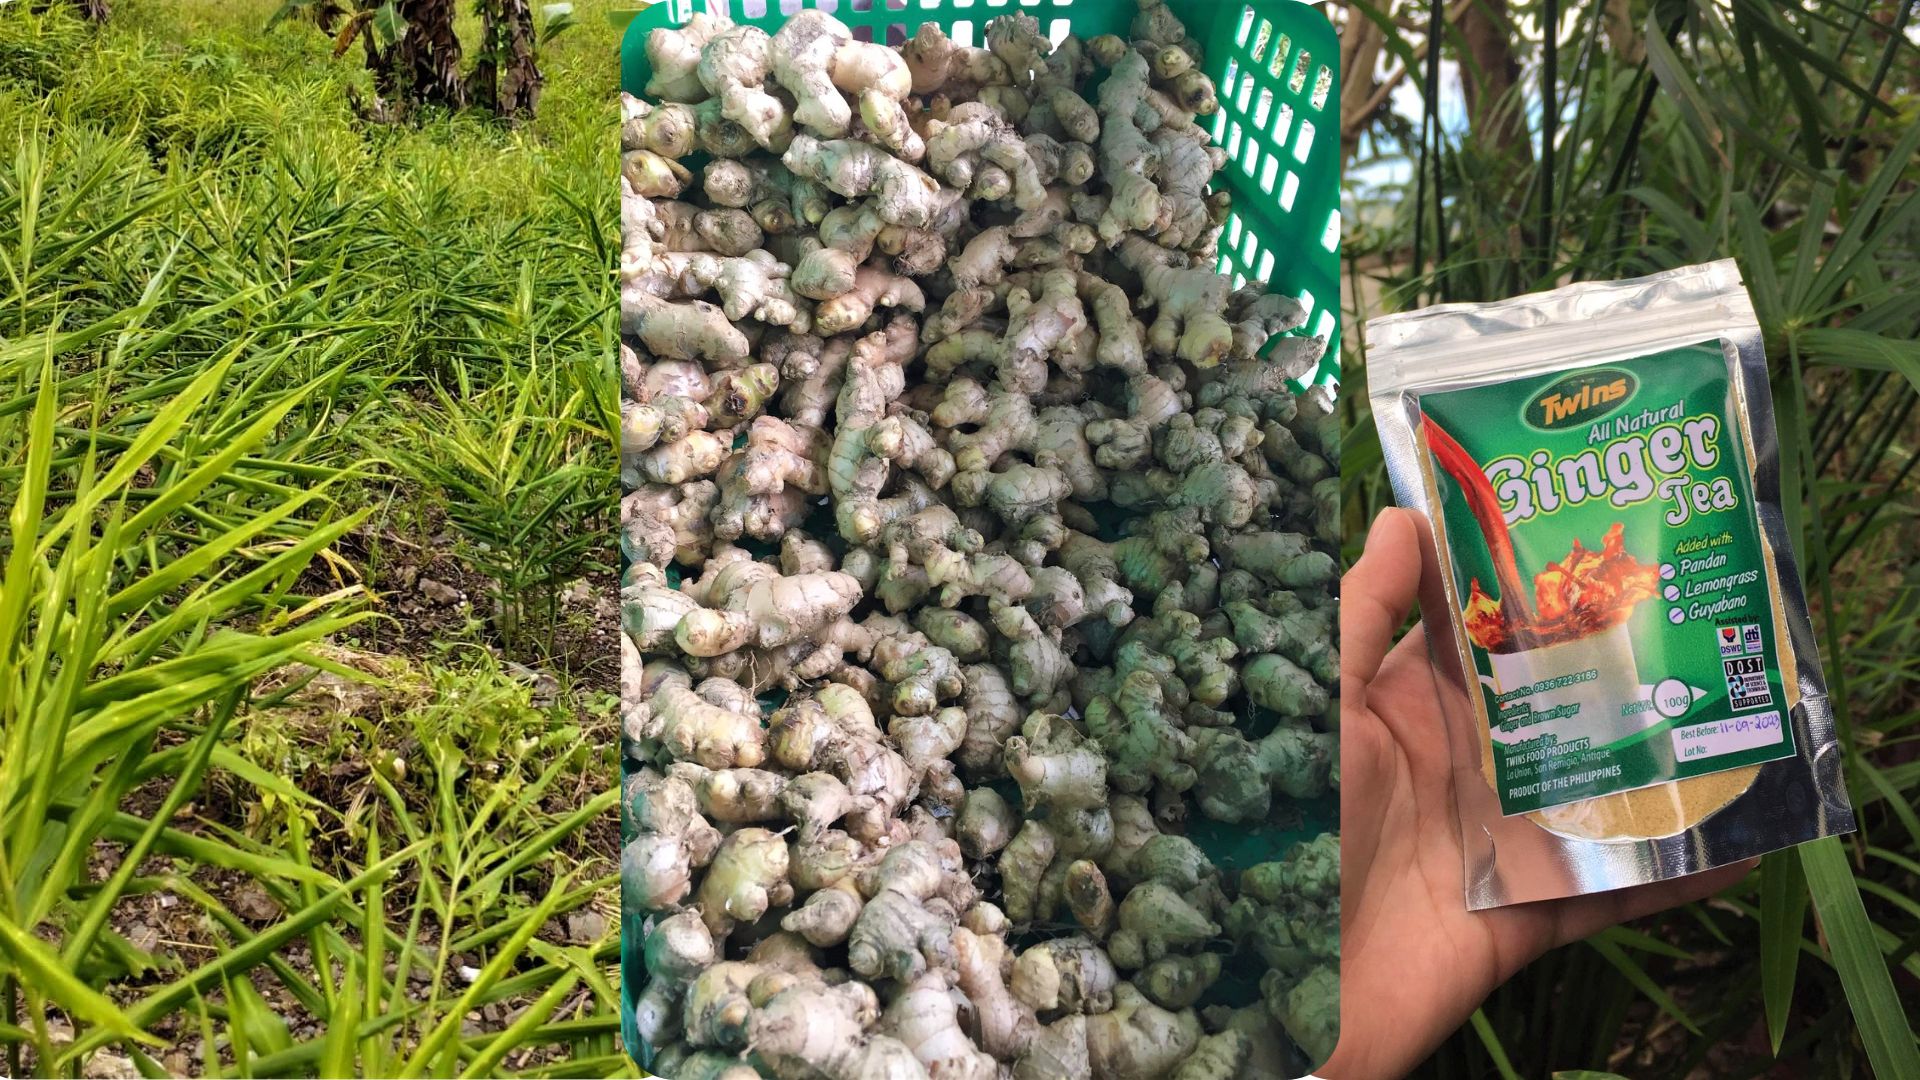 San Remigio farmers root for ginger farming, found revenue opportuni-tea in salabat processing